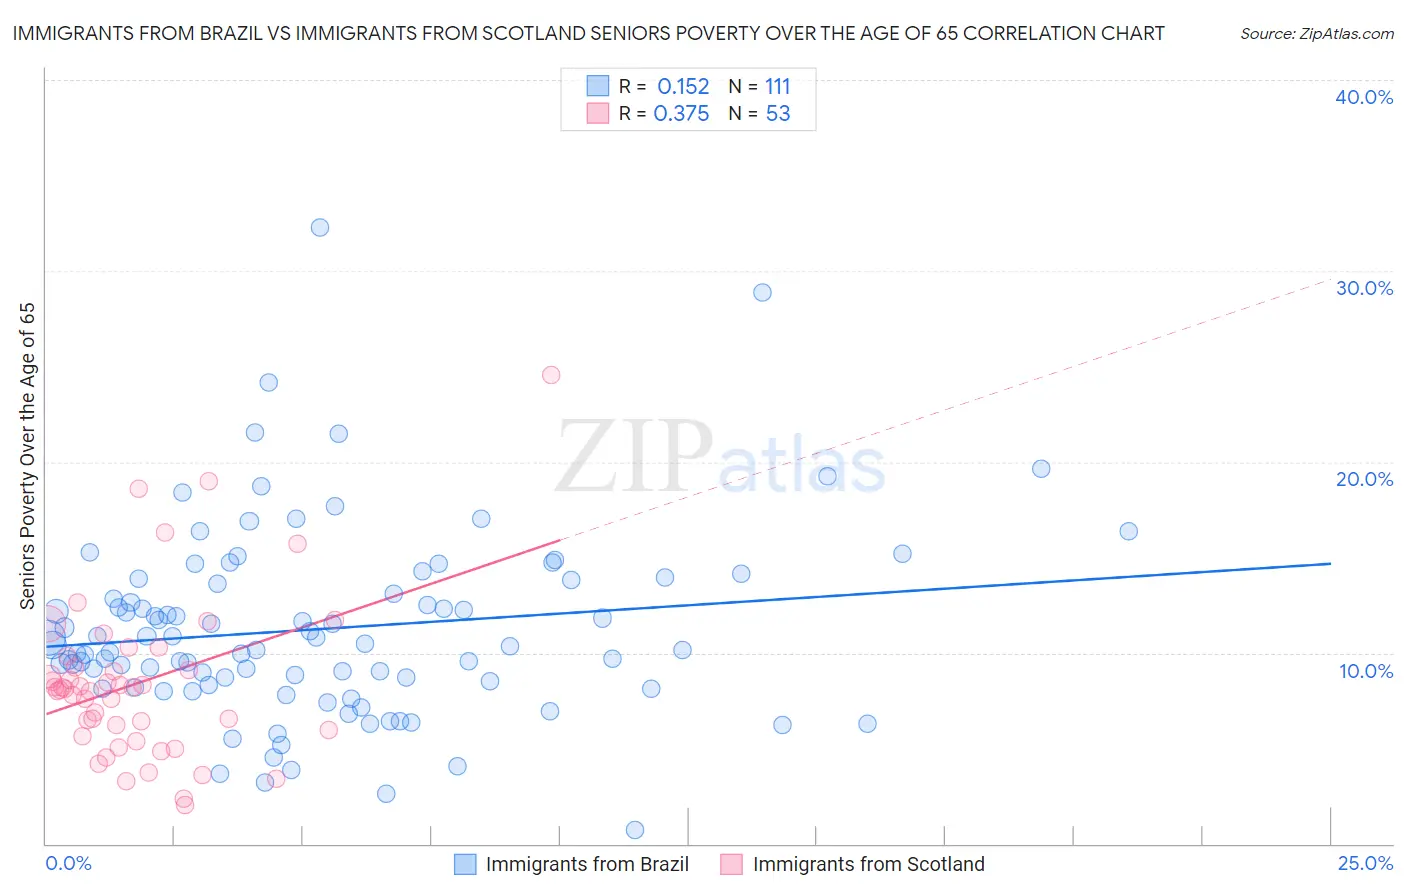 Immigrants from Brazil vs Immigrants from Scotland Seniors Poverty Over the Age of 65